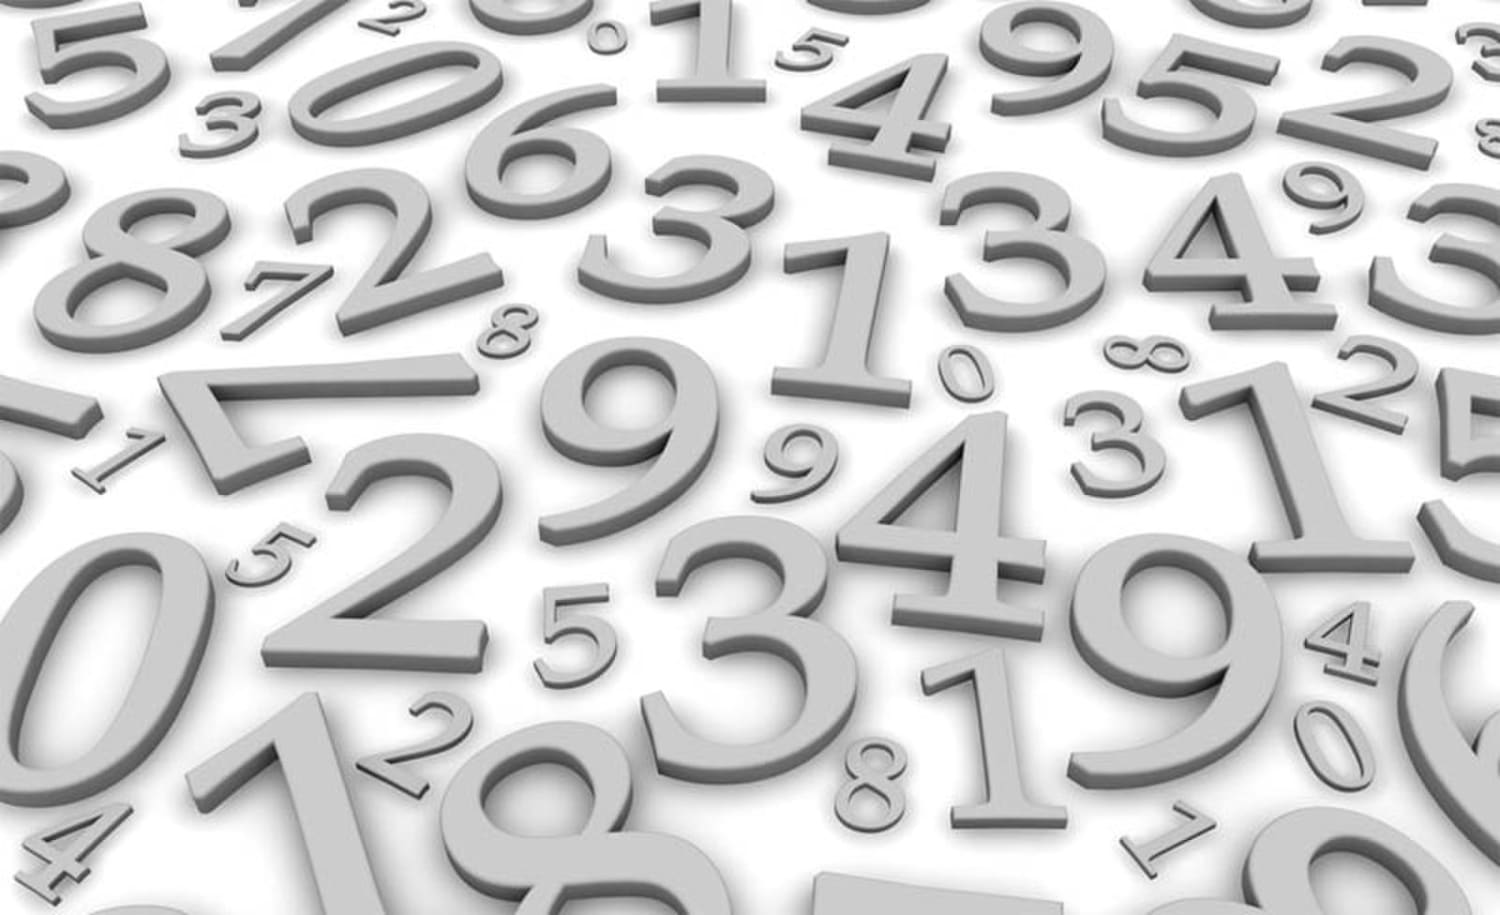 People See Odd Numbers as Male, Even as Female